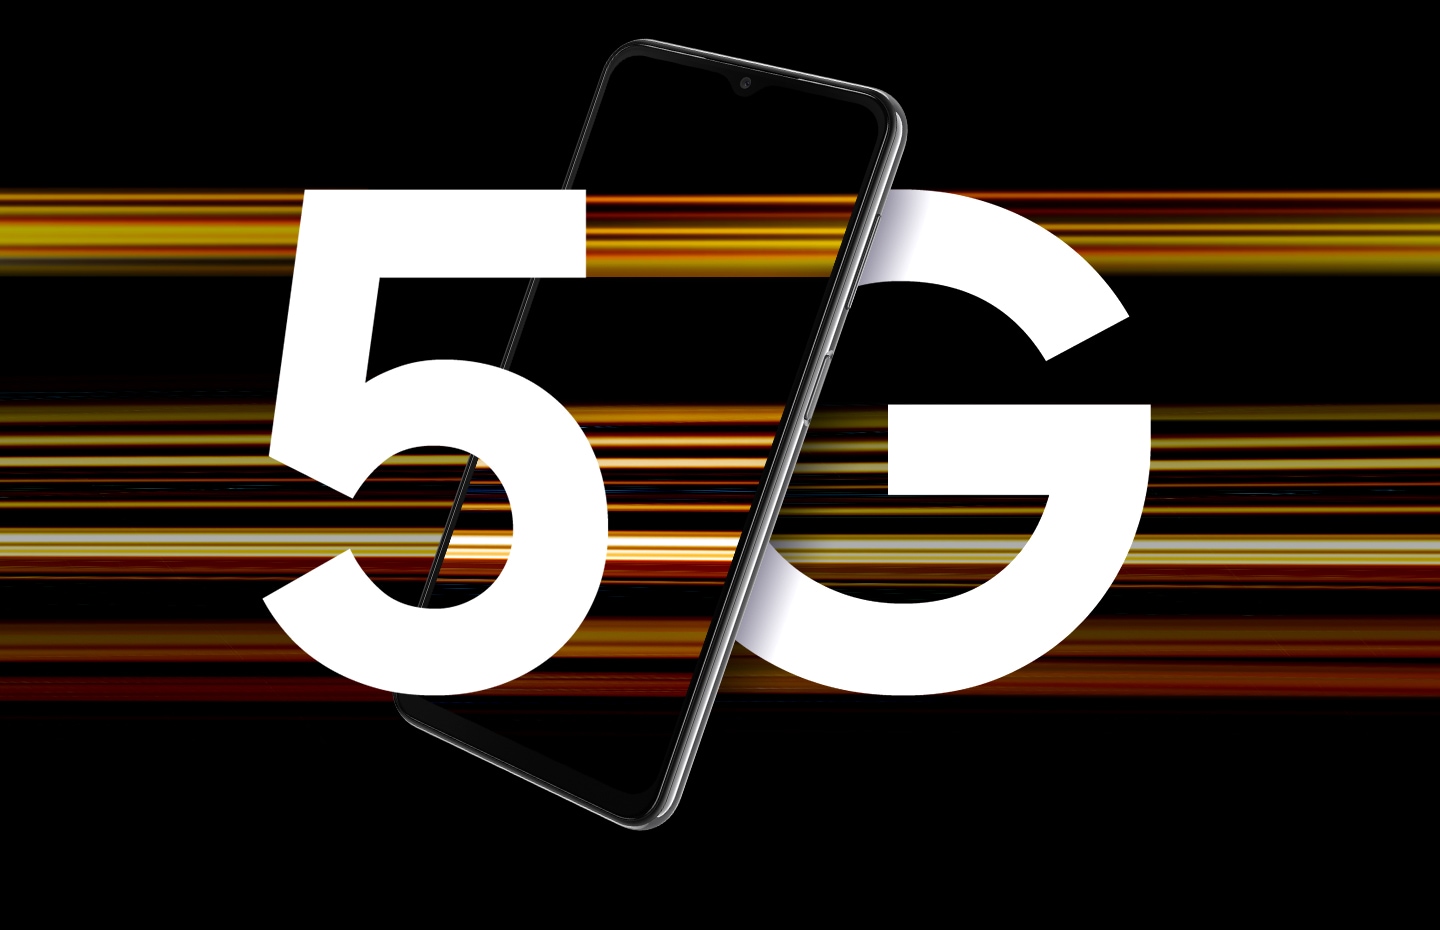 A Galaxy A23 5G device is shown with the text 5G divided at the letters by the device. Colorful streaks of light surround it to represent fast 5G speeds.